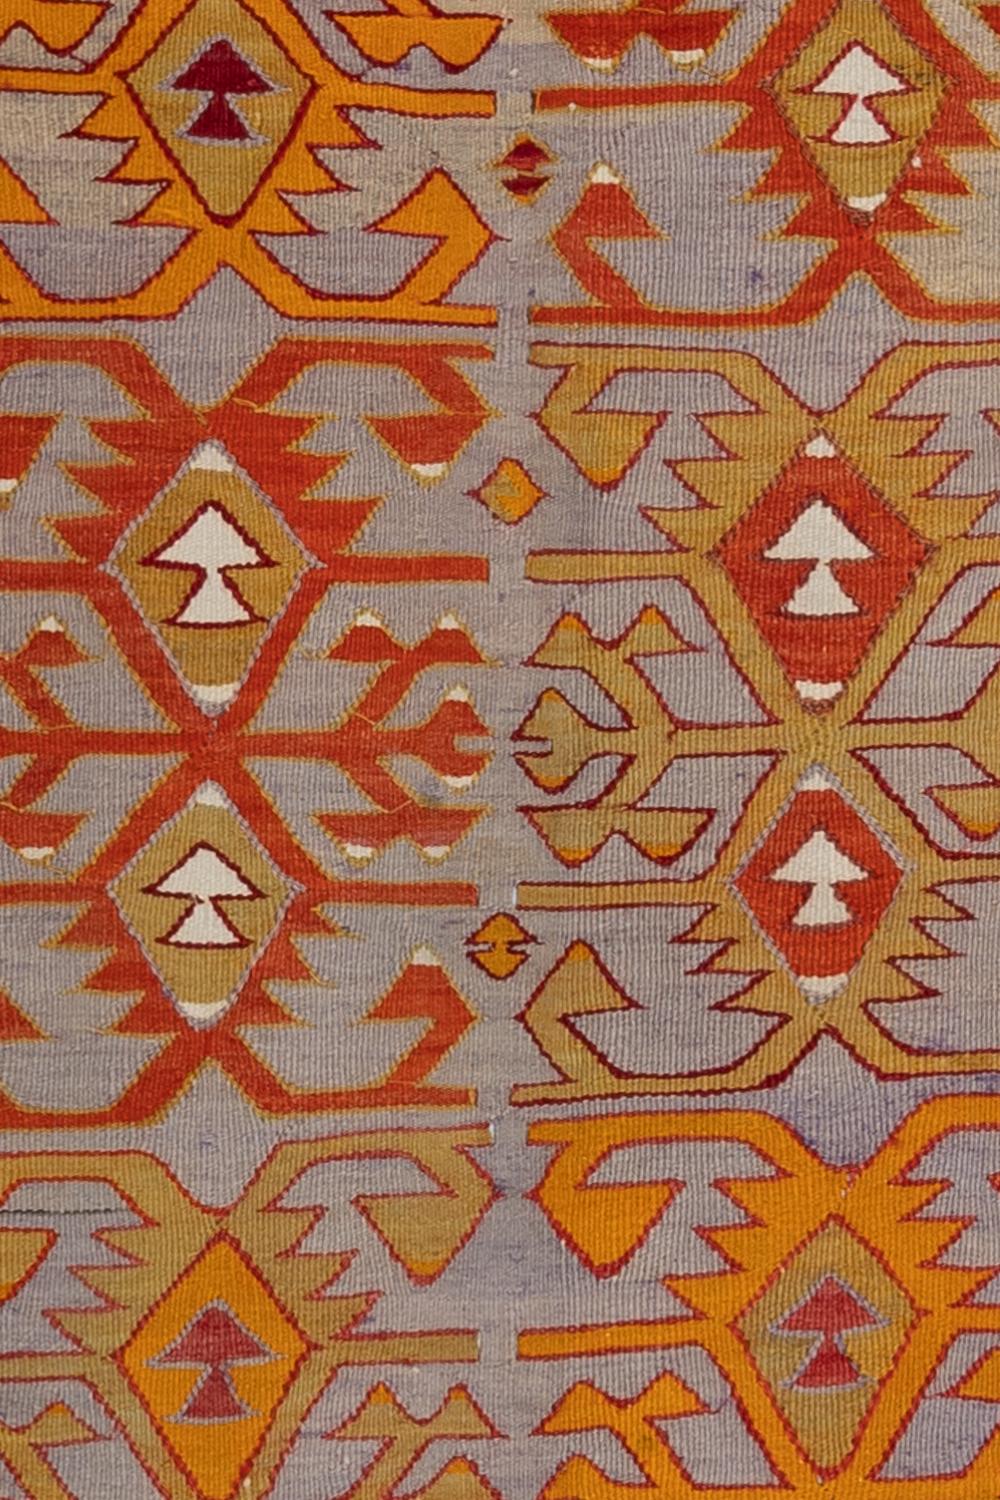 Anatolian Kilim, circa 1950.

Wear notes: none

Vintage rugs are made by hand over the course of months, sometimes years. Their imperfections and wear are evidence of the hard working human hands that made them and the generations of families